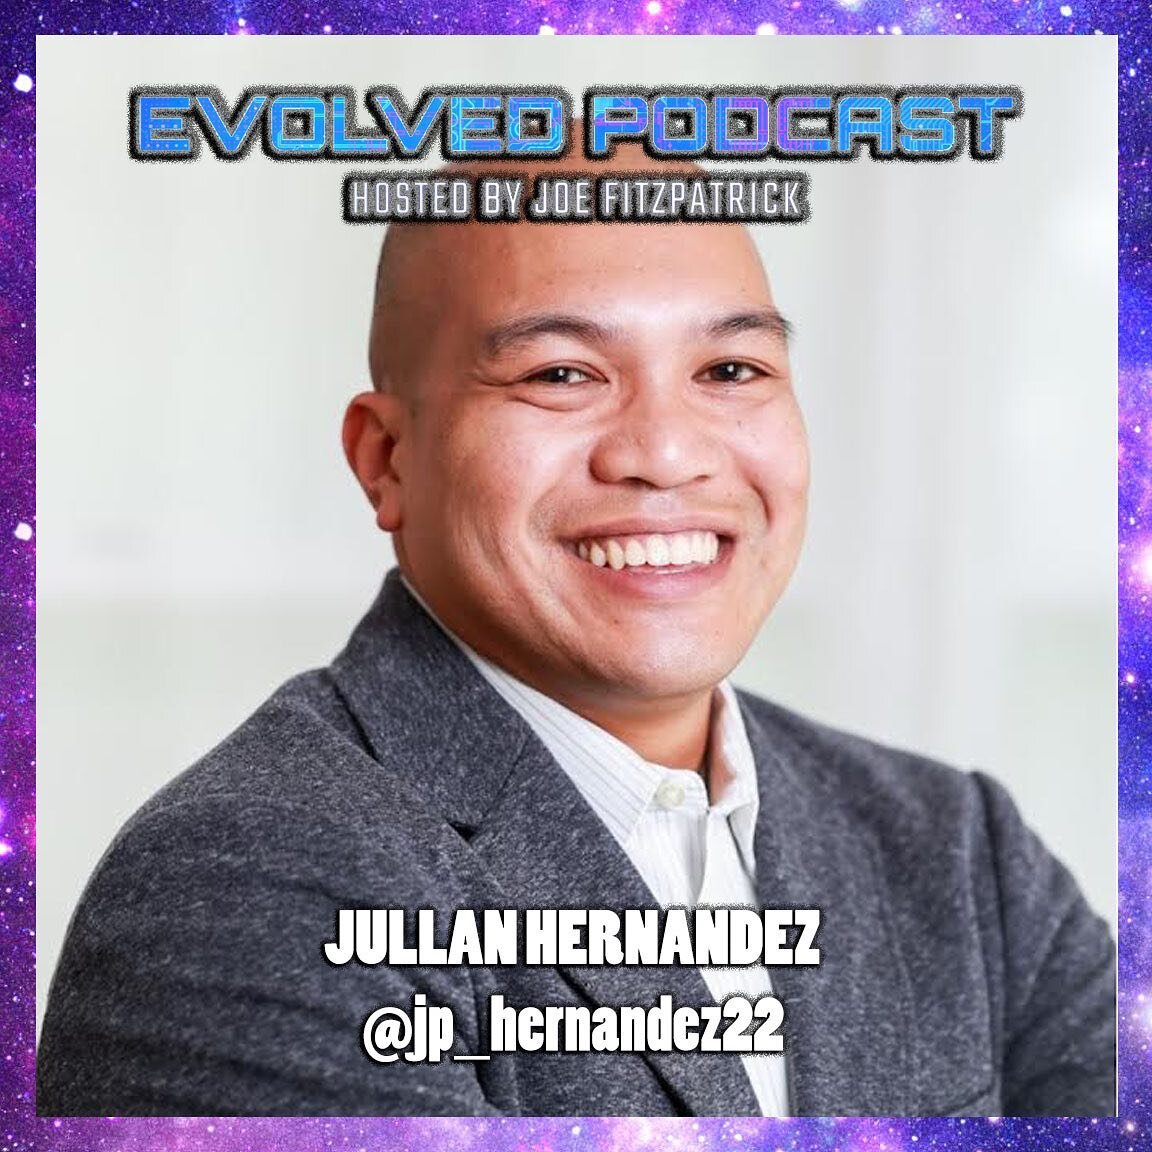 FAIL FORWARD: JULLAN HERNANDEZ @jp_hernandez22 OVERCOMES FEAR OF FAILURE IN ENTREPRENEURSHIP | EP. 016

Born in the Philippines, Jullan Hernandez immigrated to the United States at the age of 9 with his mother and stepfather. After graduating high sc